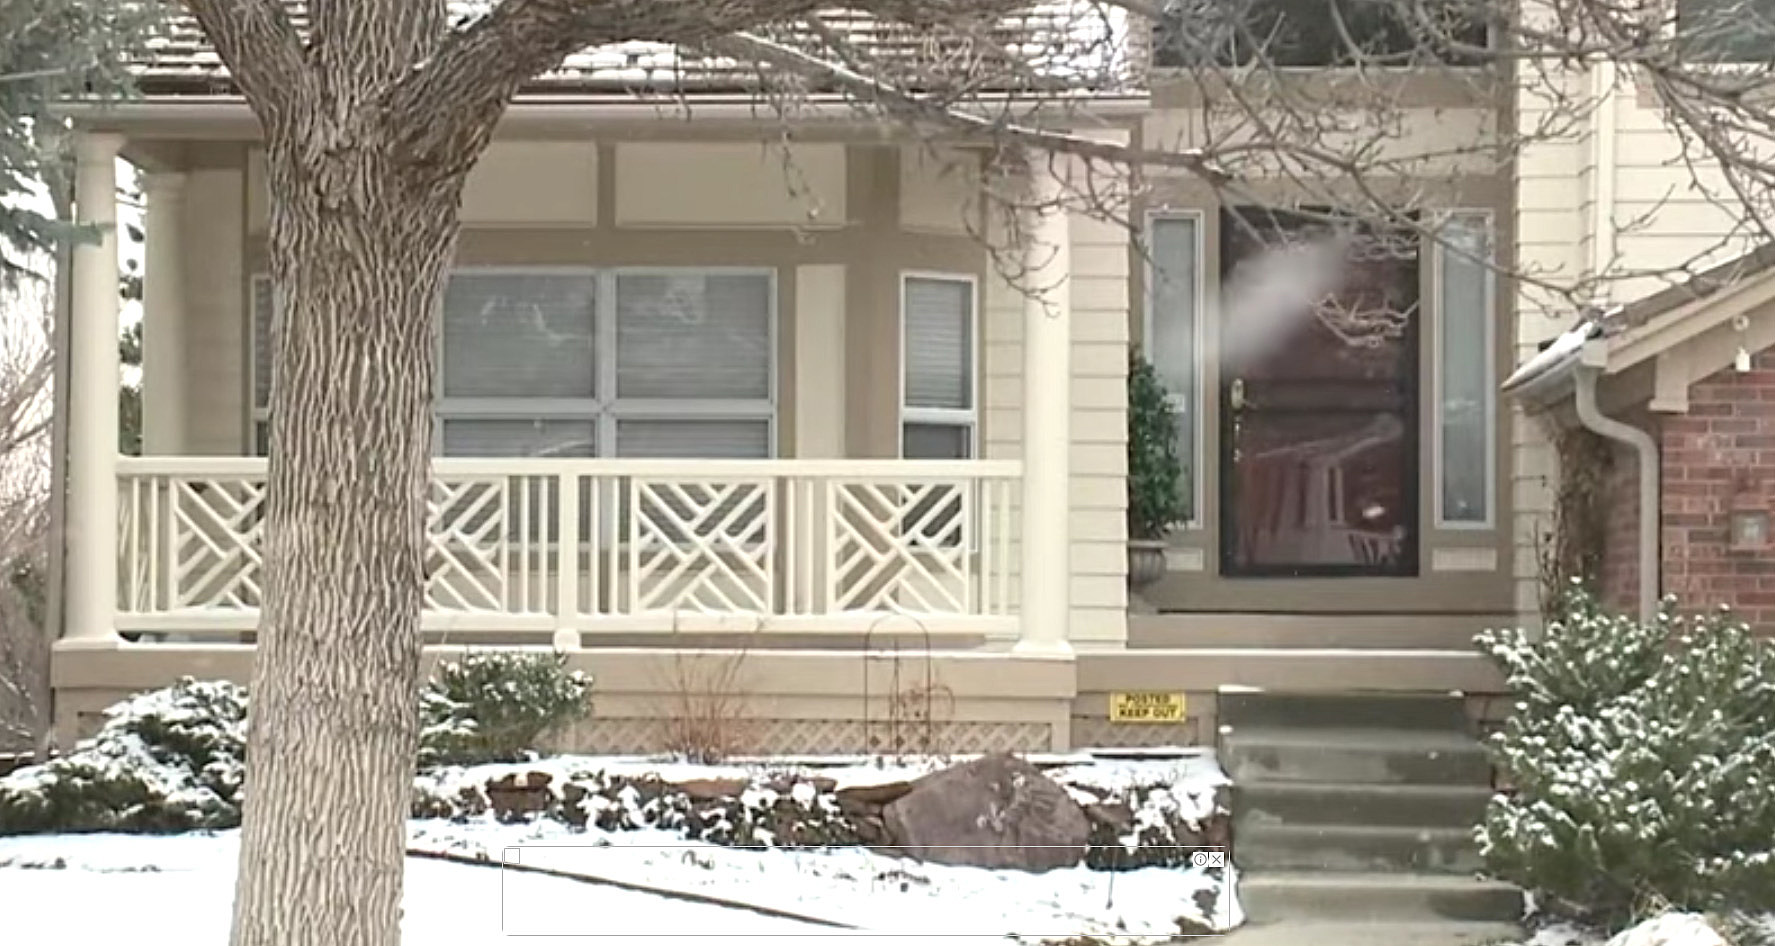 Colorado Couple Arrested for Elaborate Booby Trap on Front Porch